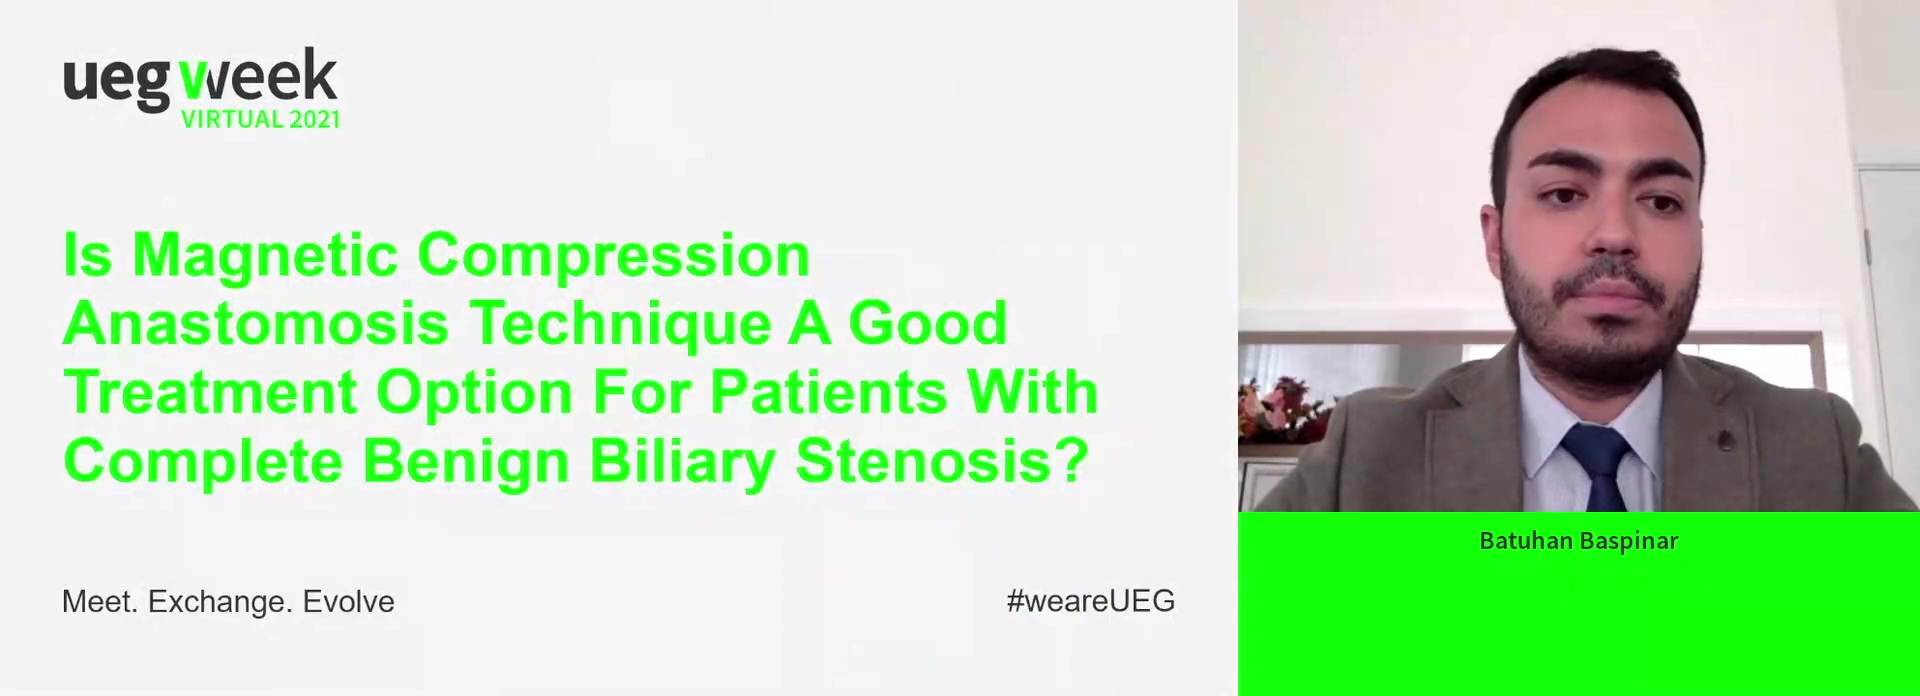 IS MAGNETIC COMPRESSION ANASTOMOSIS TECHNIQUE A GOOD TREATMENT OPTION FOR PATIENTS WITH COMPLETE BENIGN BILIARY STENOSIS?